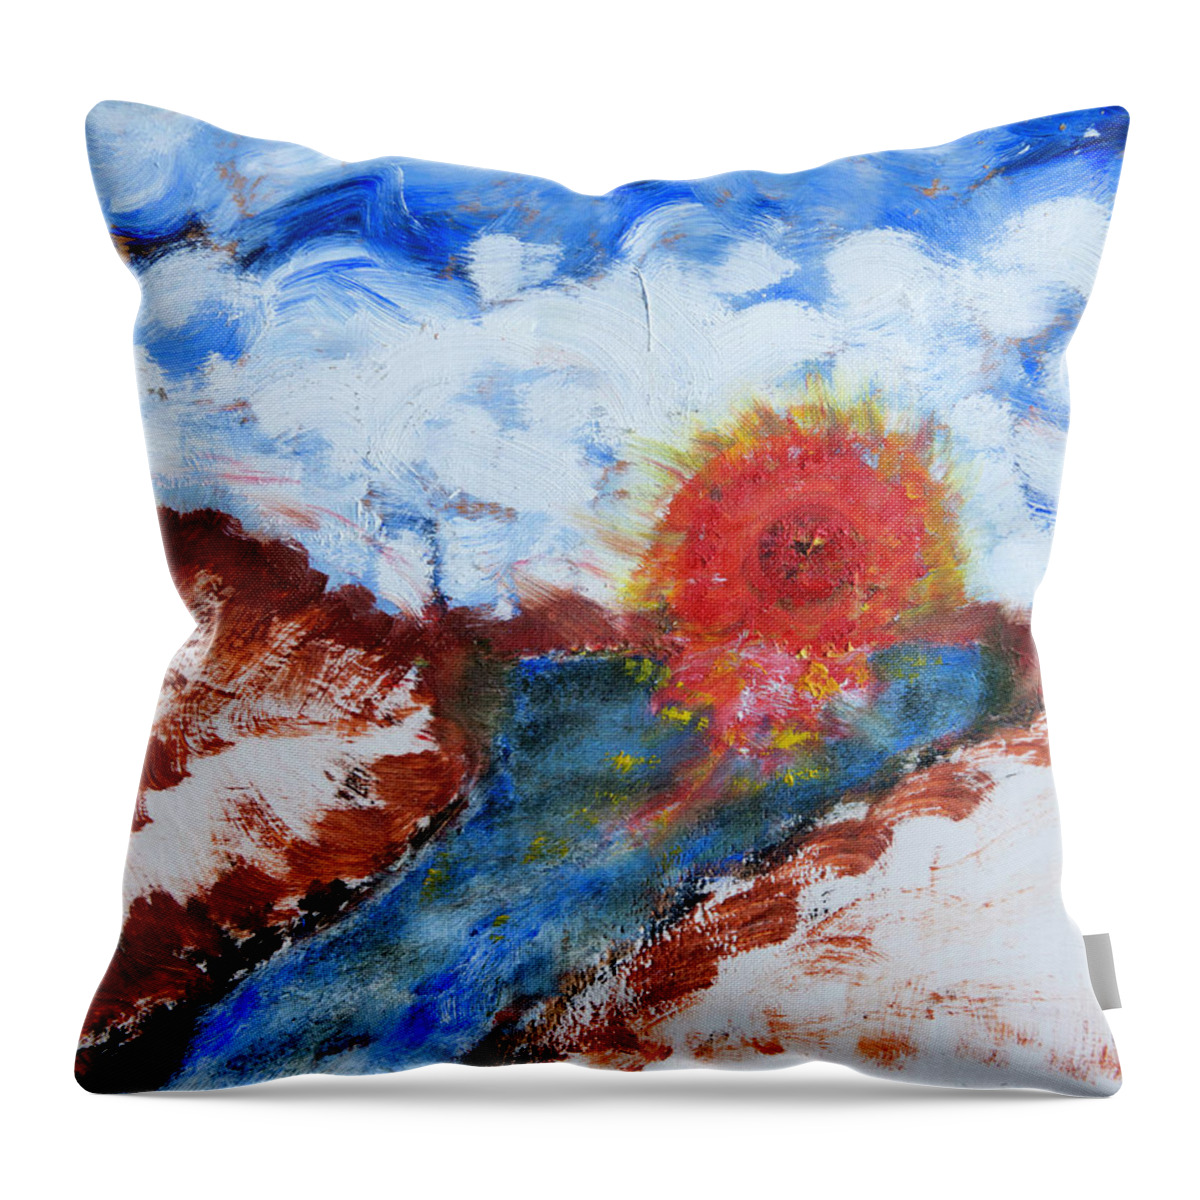  Throw Pillow featuring the painting Sunset by David McCready